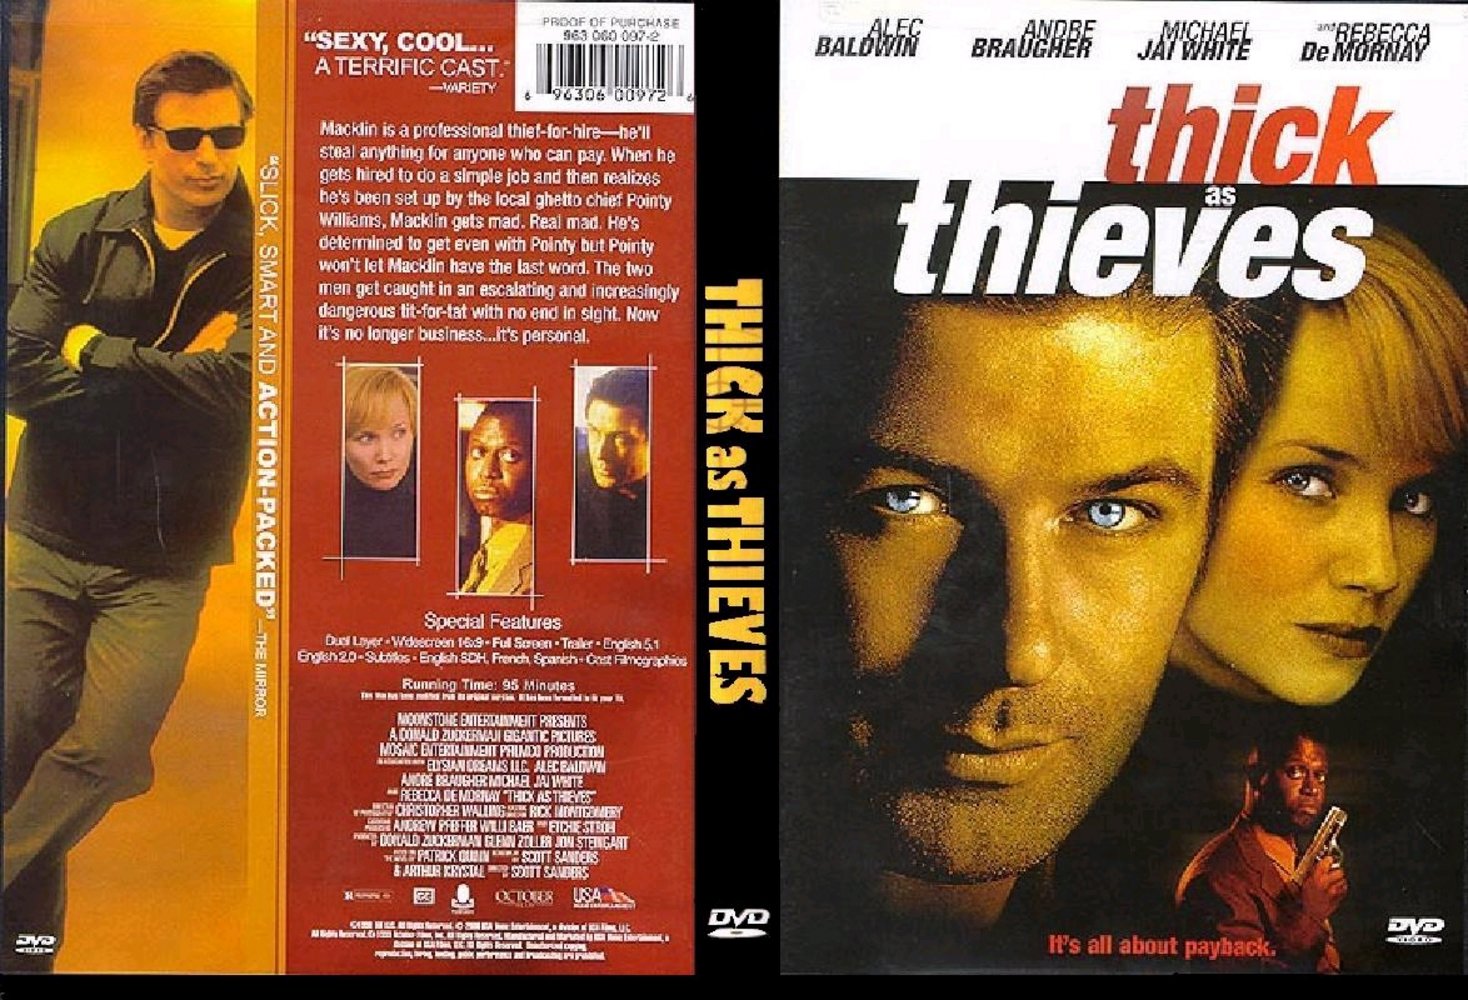 thick as thieves (english) - front.